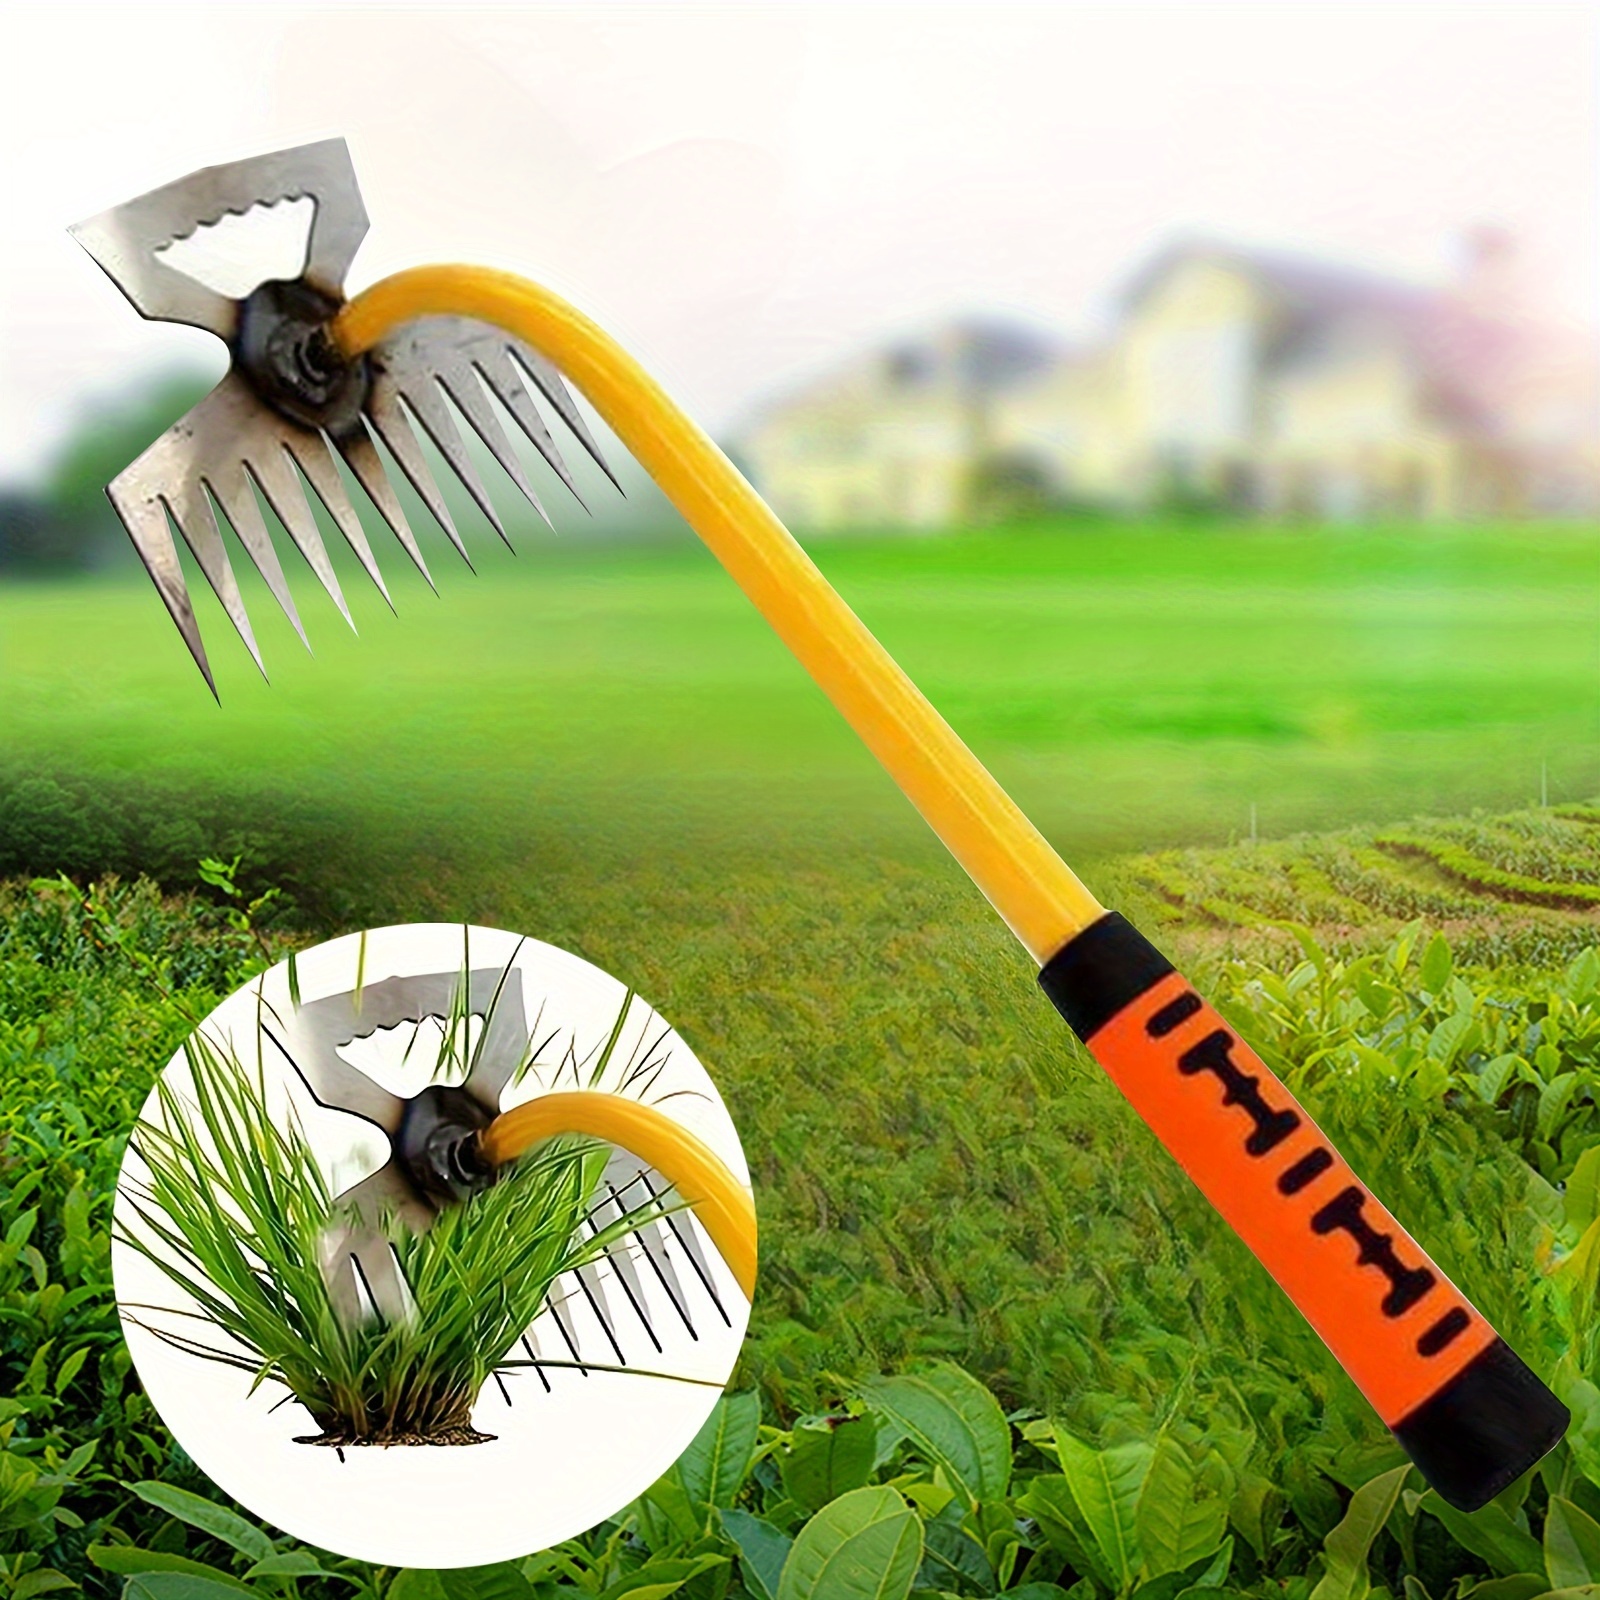 

Ergonomic Weeding Puller Tool - Durable Stainless Steel & Rubber, Long Handle For Easy Grip, Precision Root Extraction - Perfect For Gardens, Patios & Farms